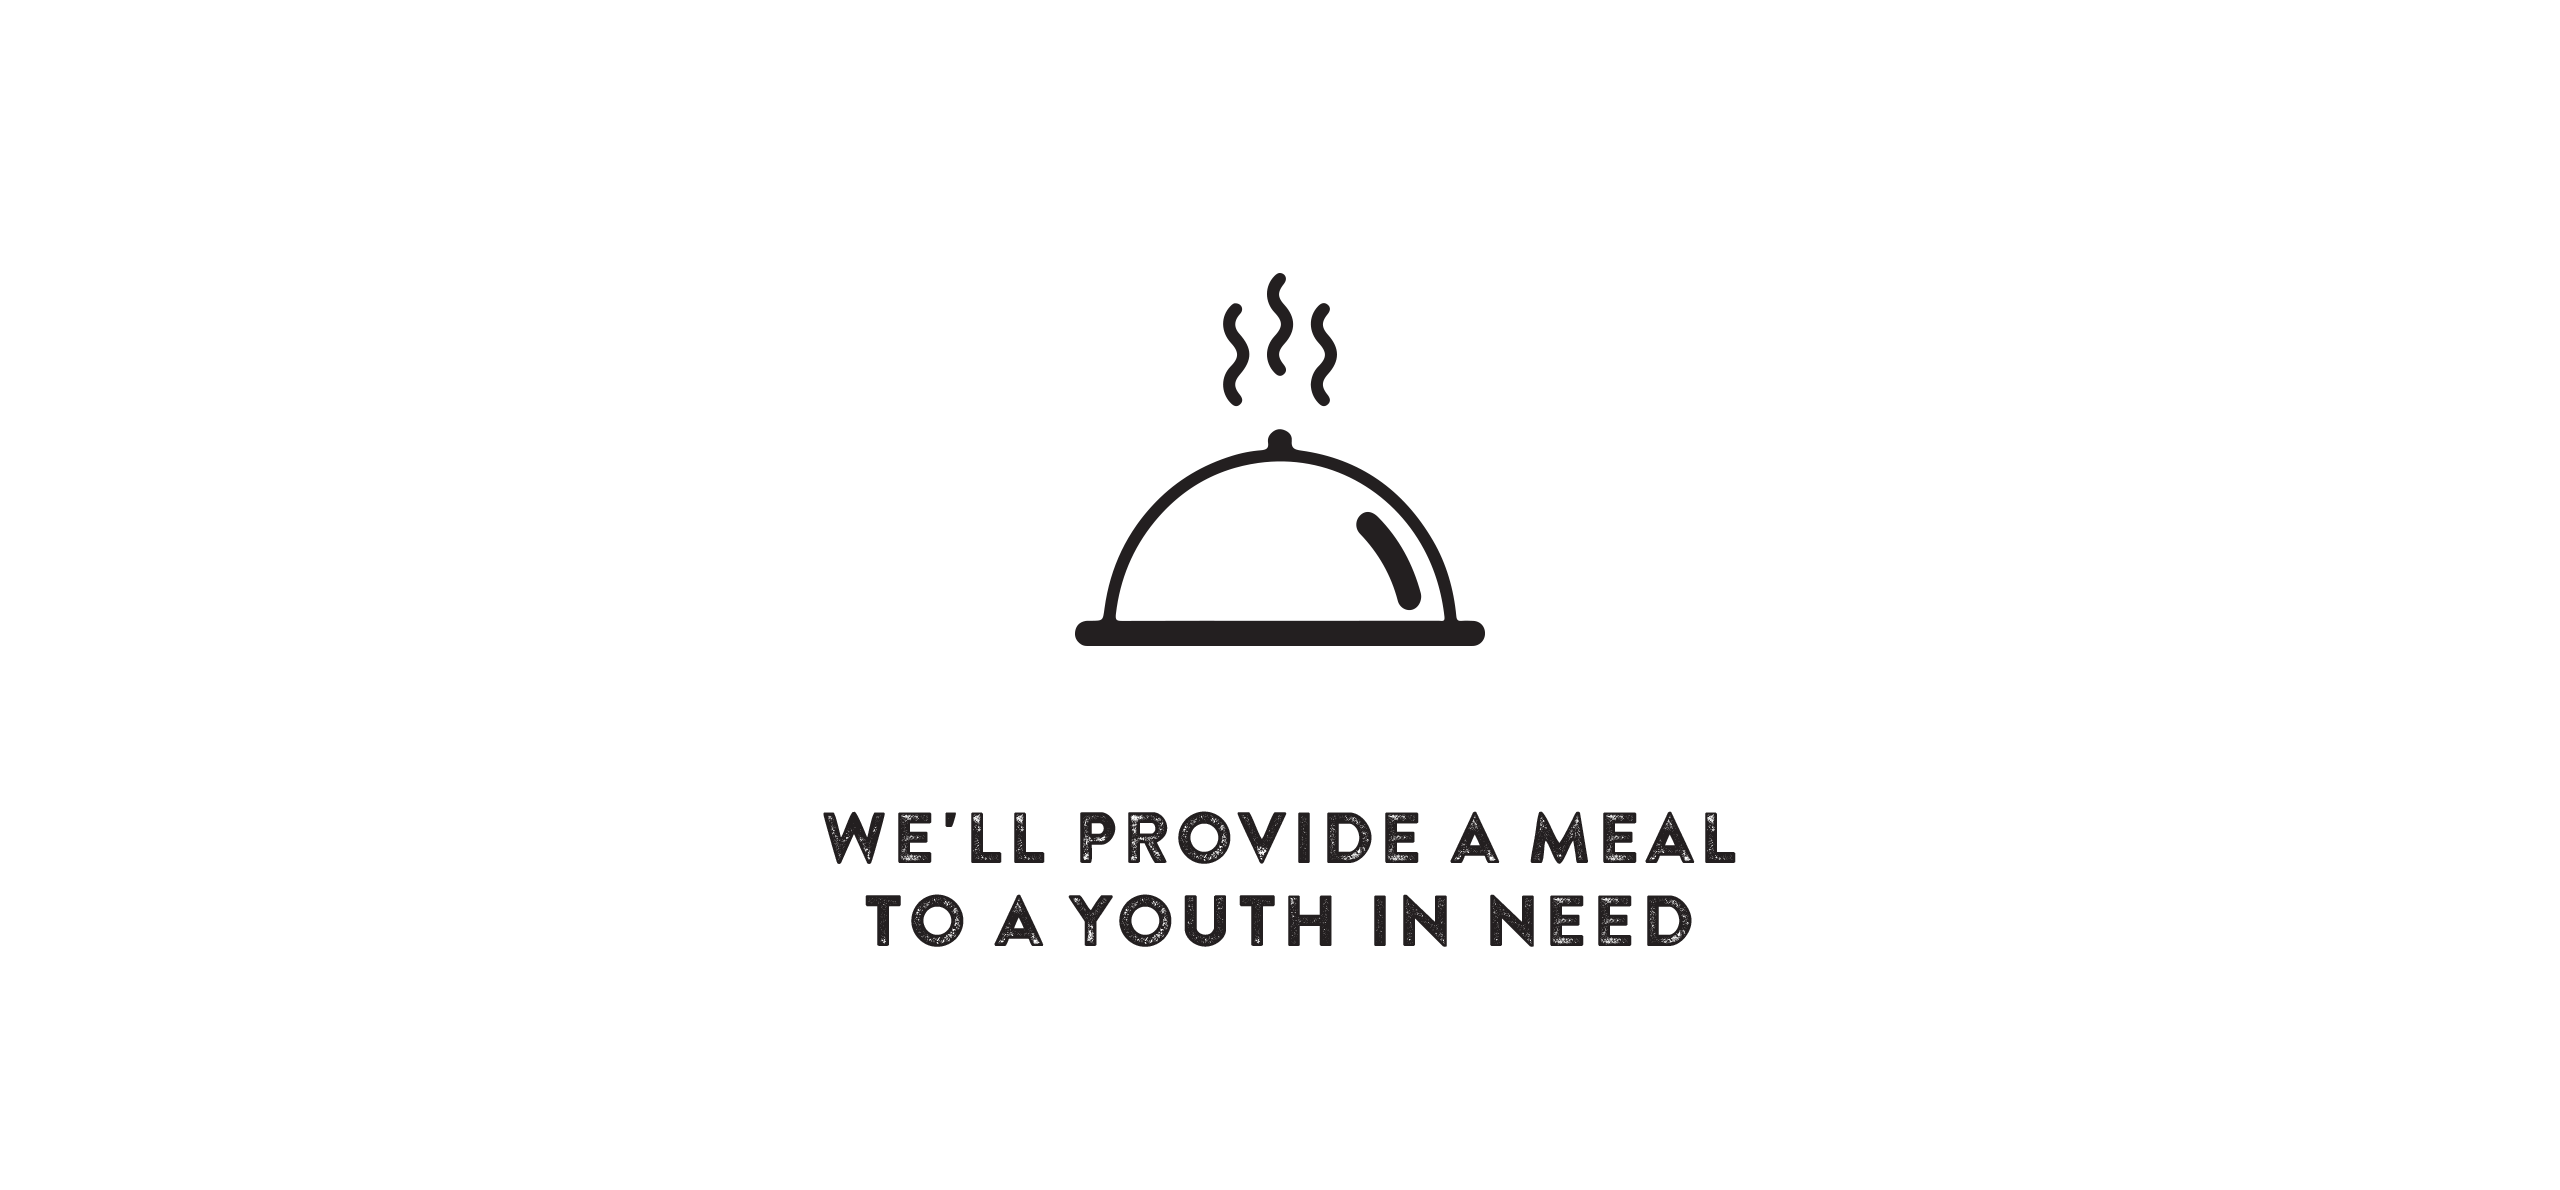 We''ll Provide A Meal To A Kid In Need